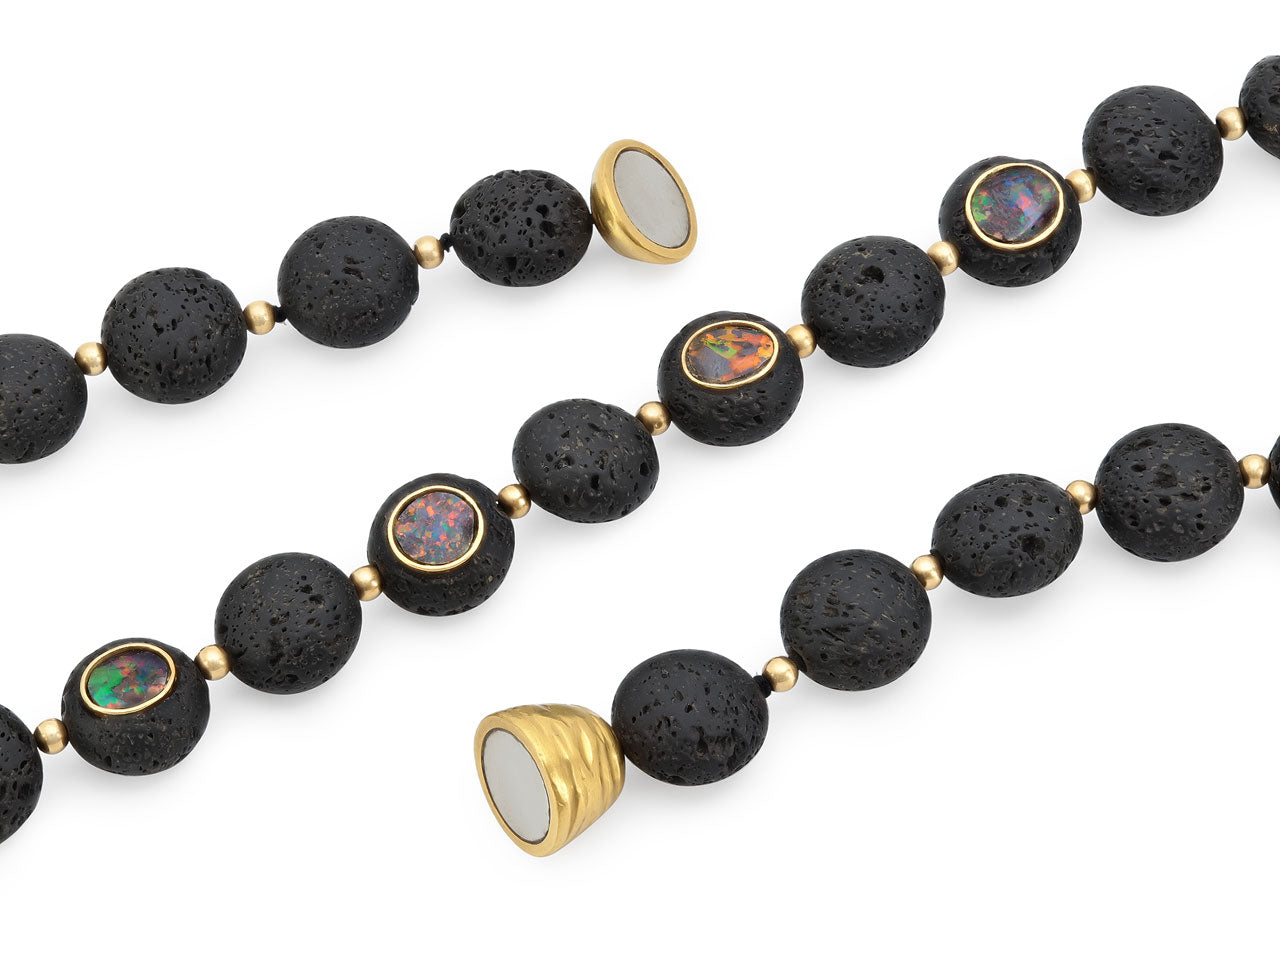 K. Brunini Black Opal Necklace in 14K and 22K Gold